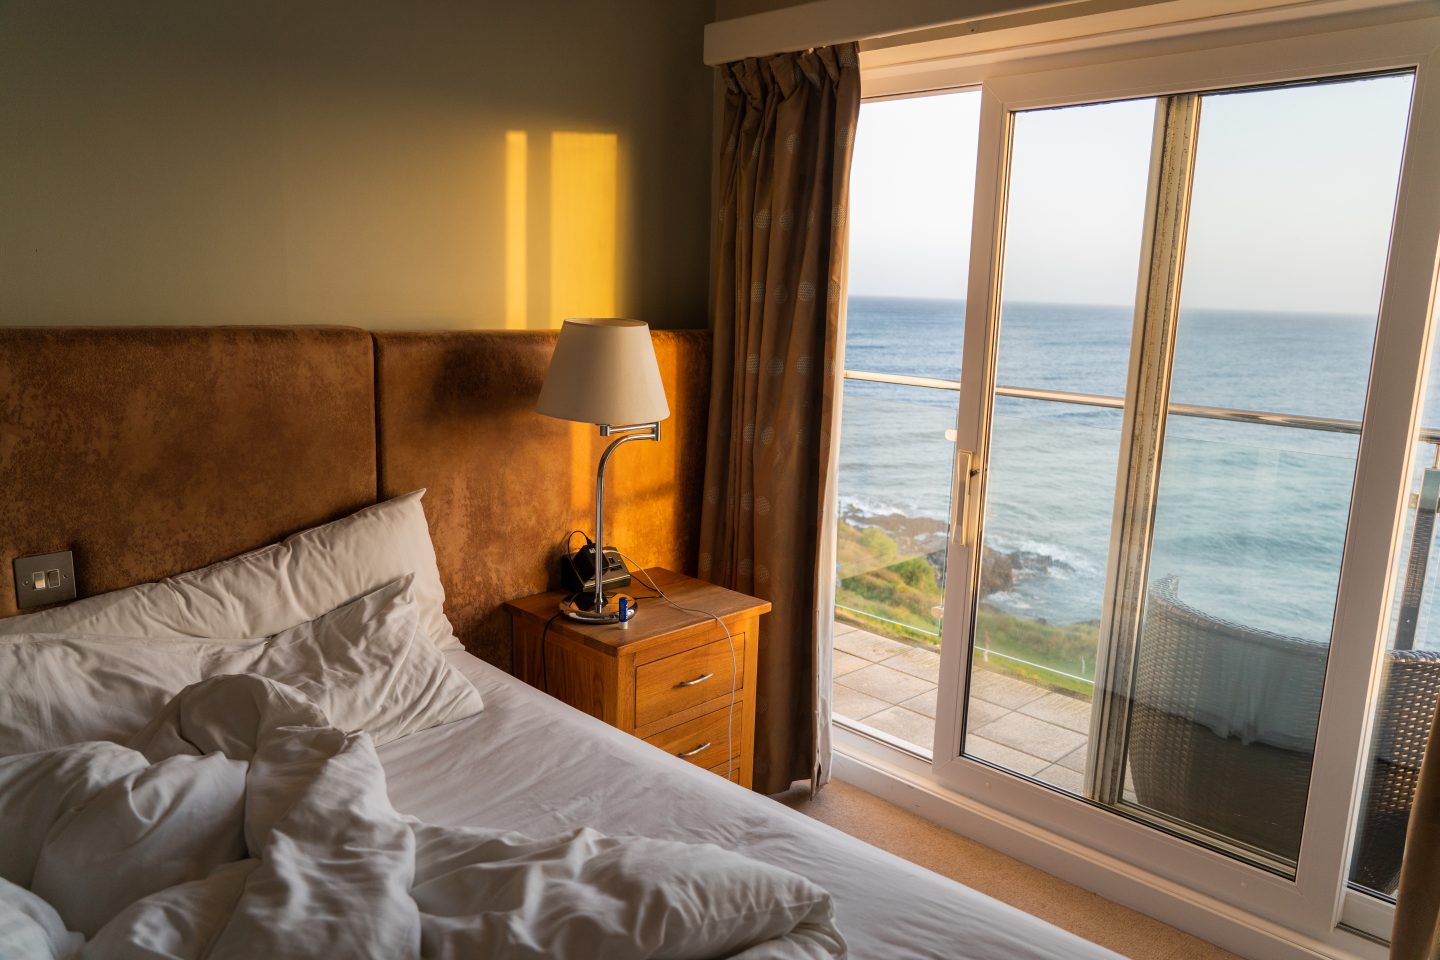 Fistral Beach Hotel and Spa - the room view